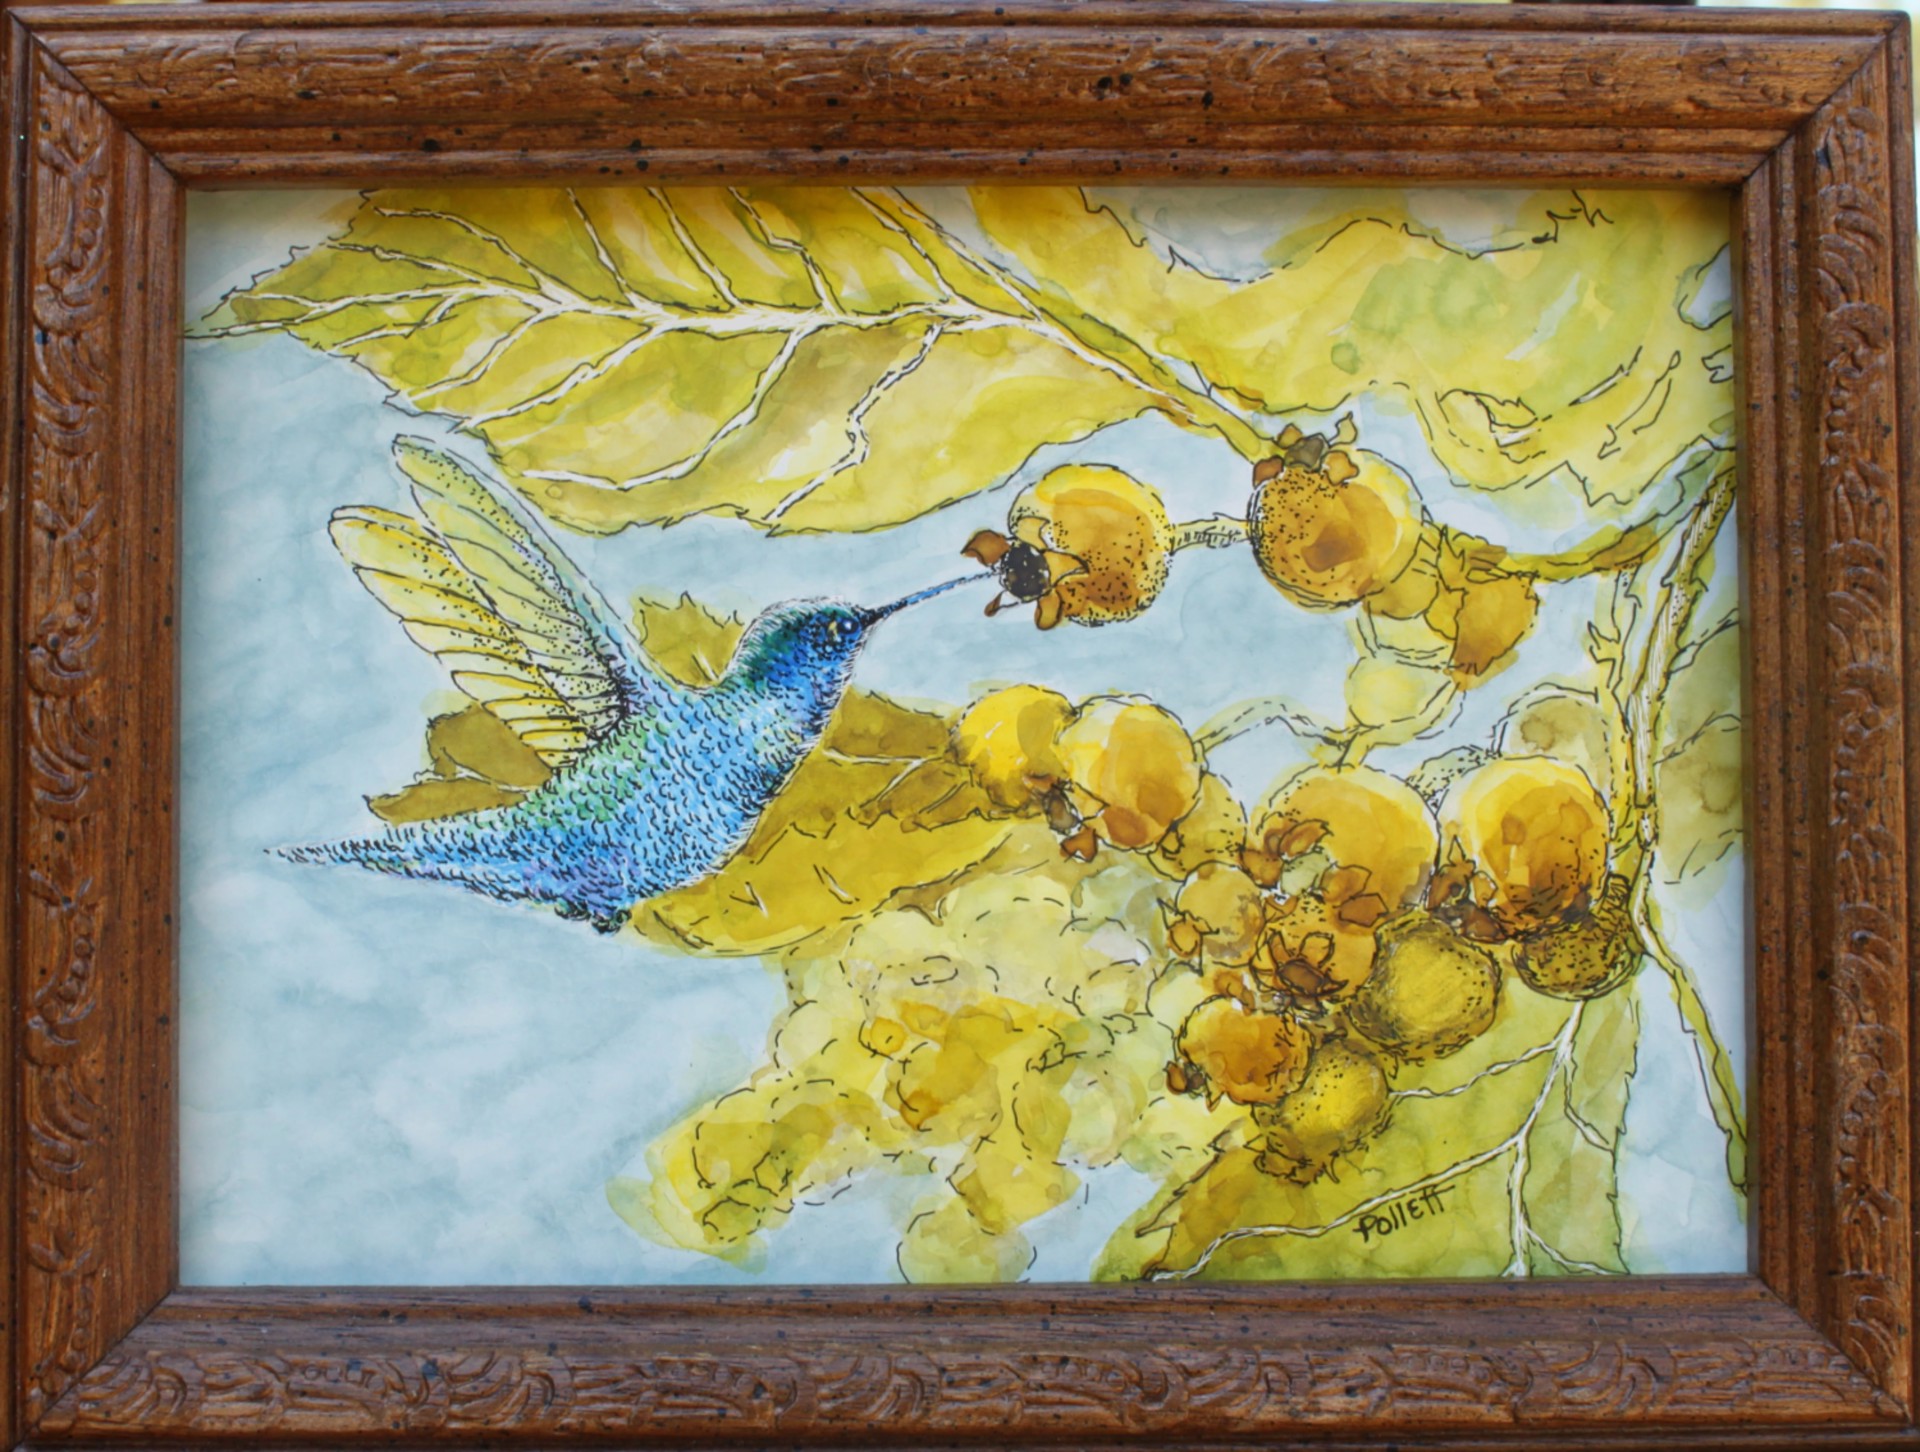 Hummer and Fruit by Cynthia Jewell Pollett